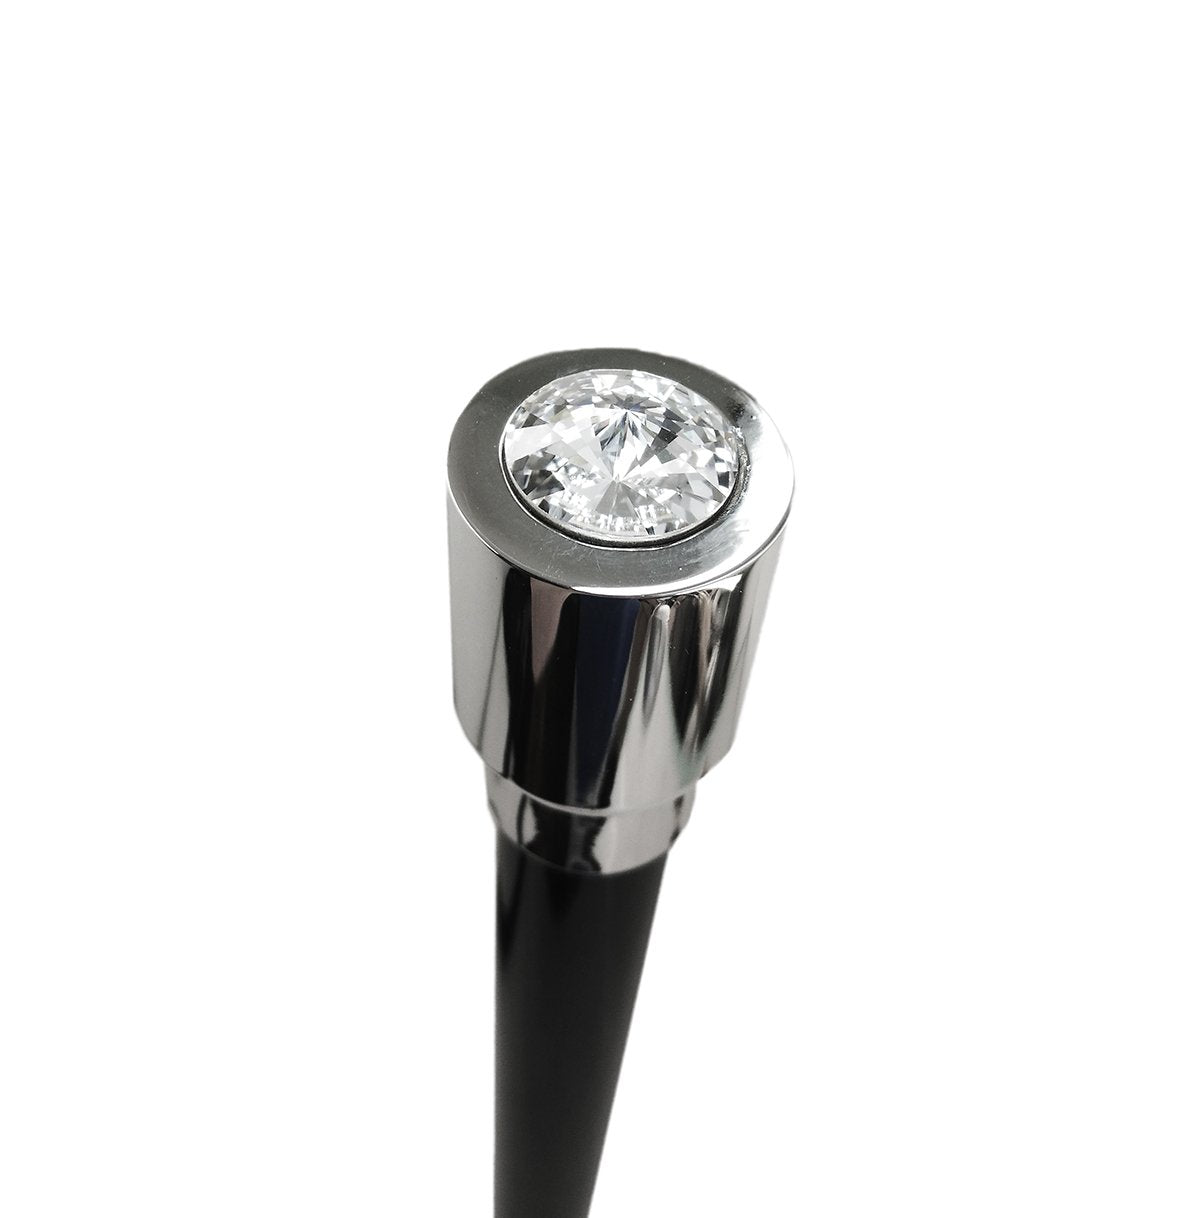 Luxurious and Elegant Walking Stick for Ceremonies - il-marchesato